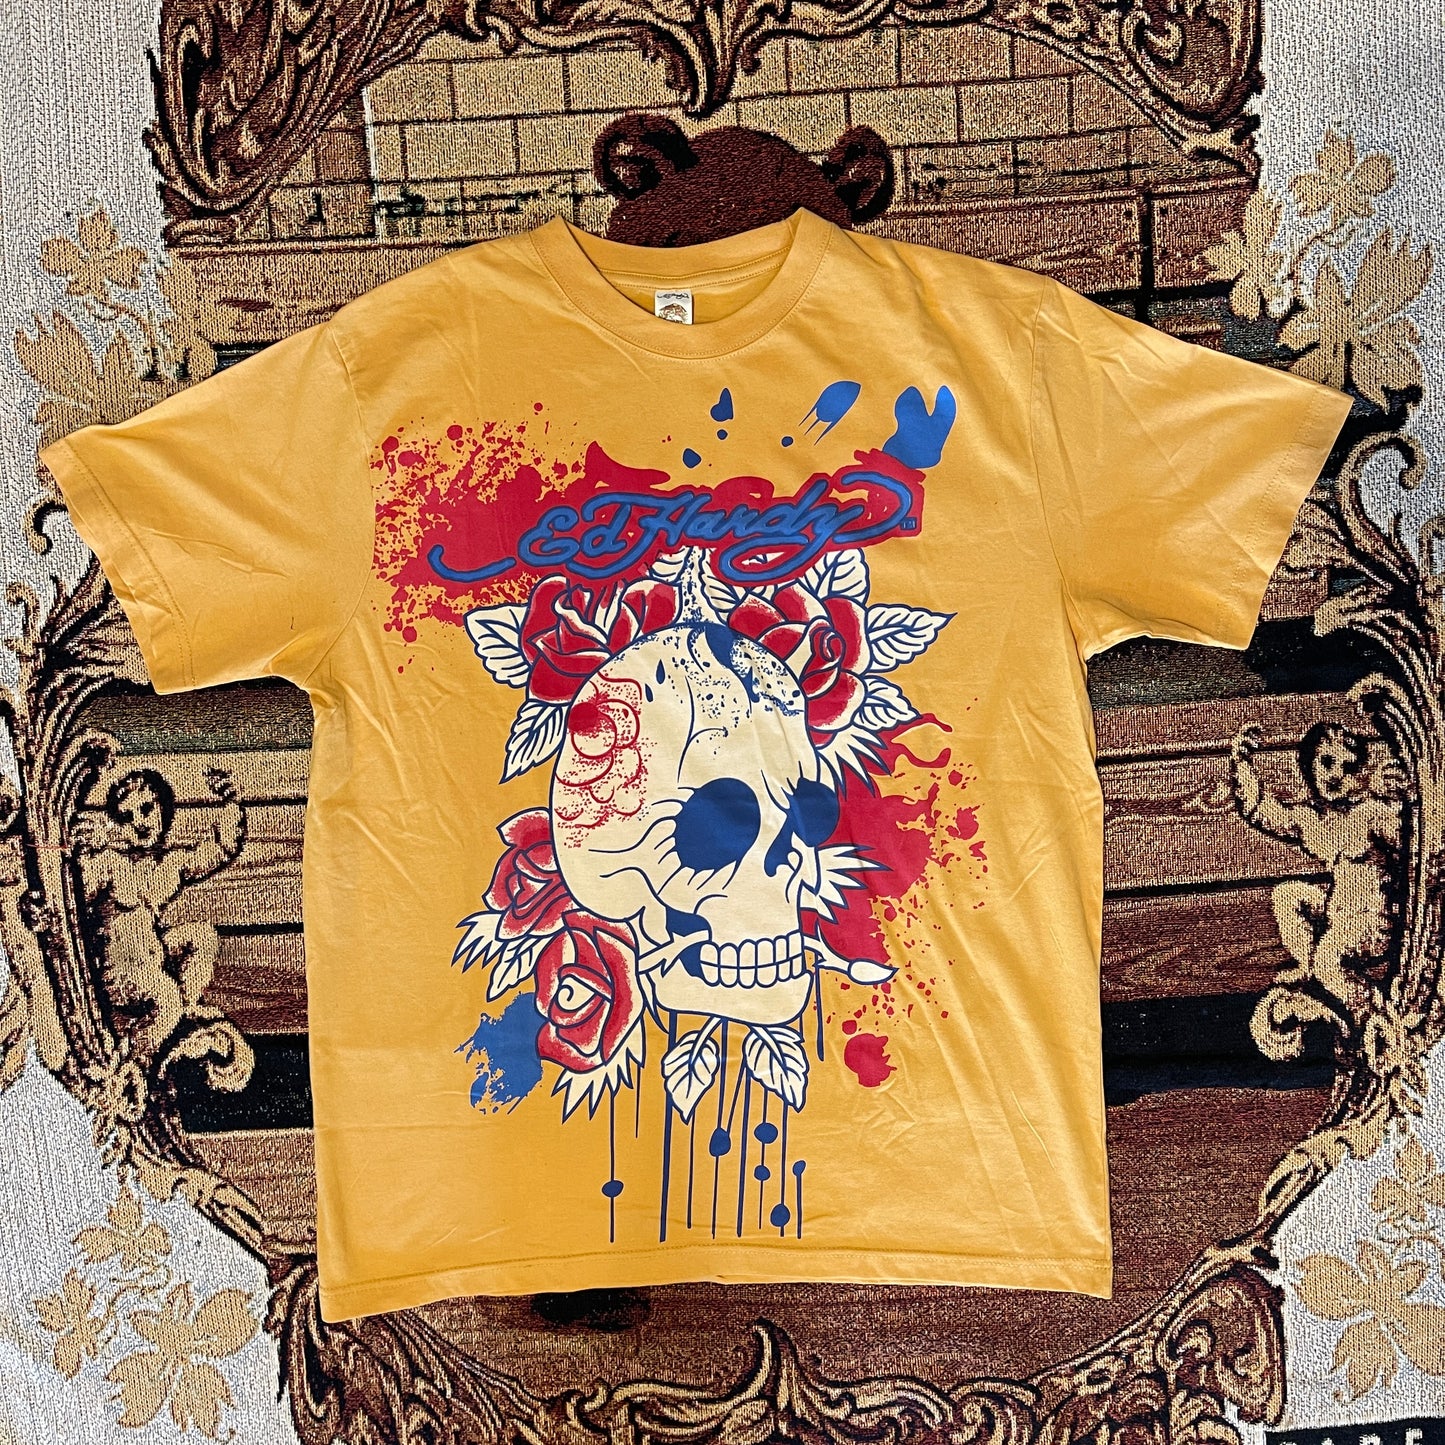 Vintage ed Hardy Skull and roses T-shirt